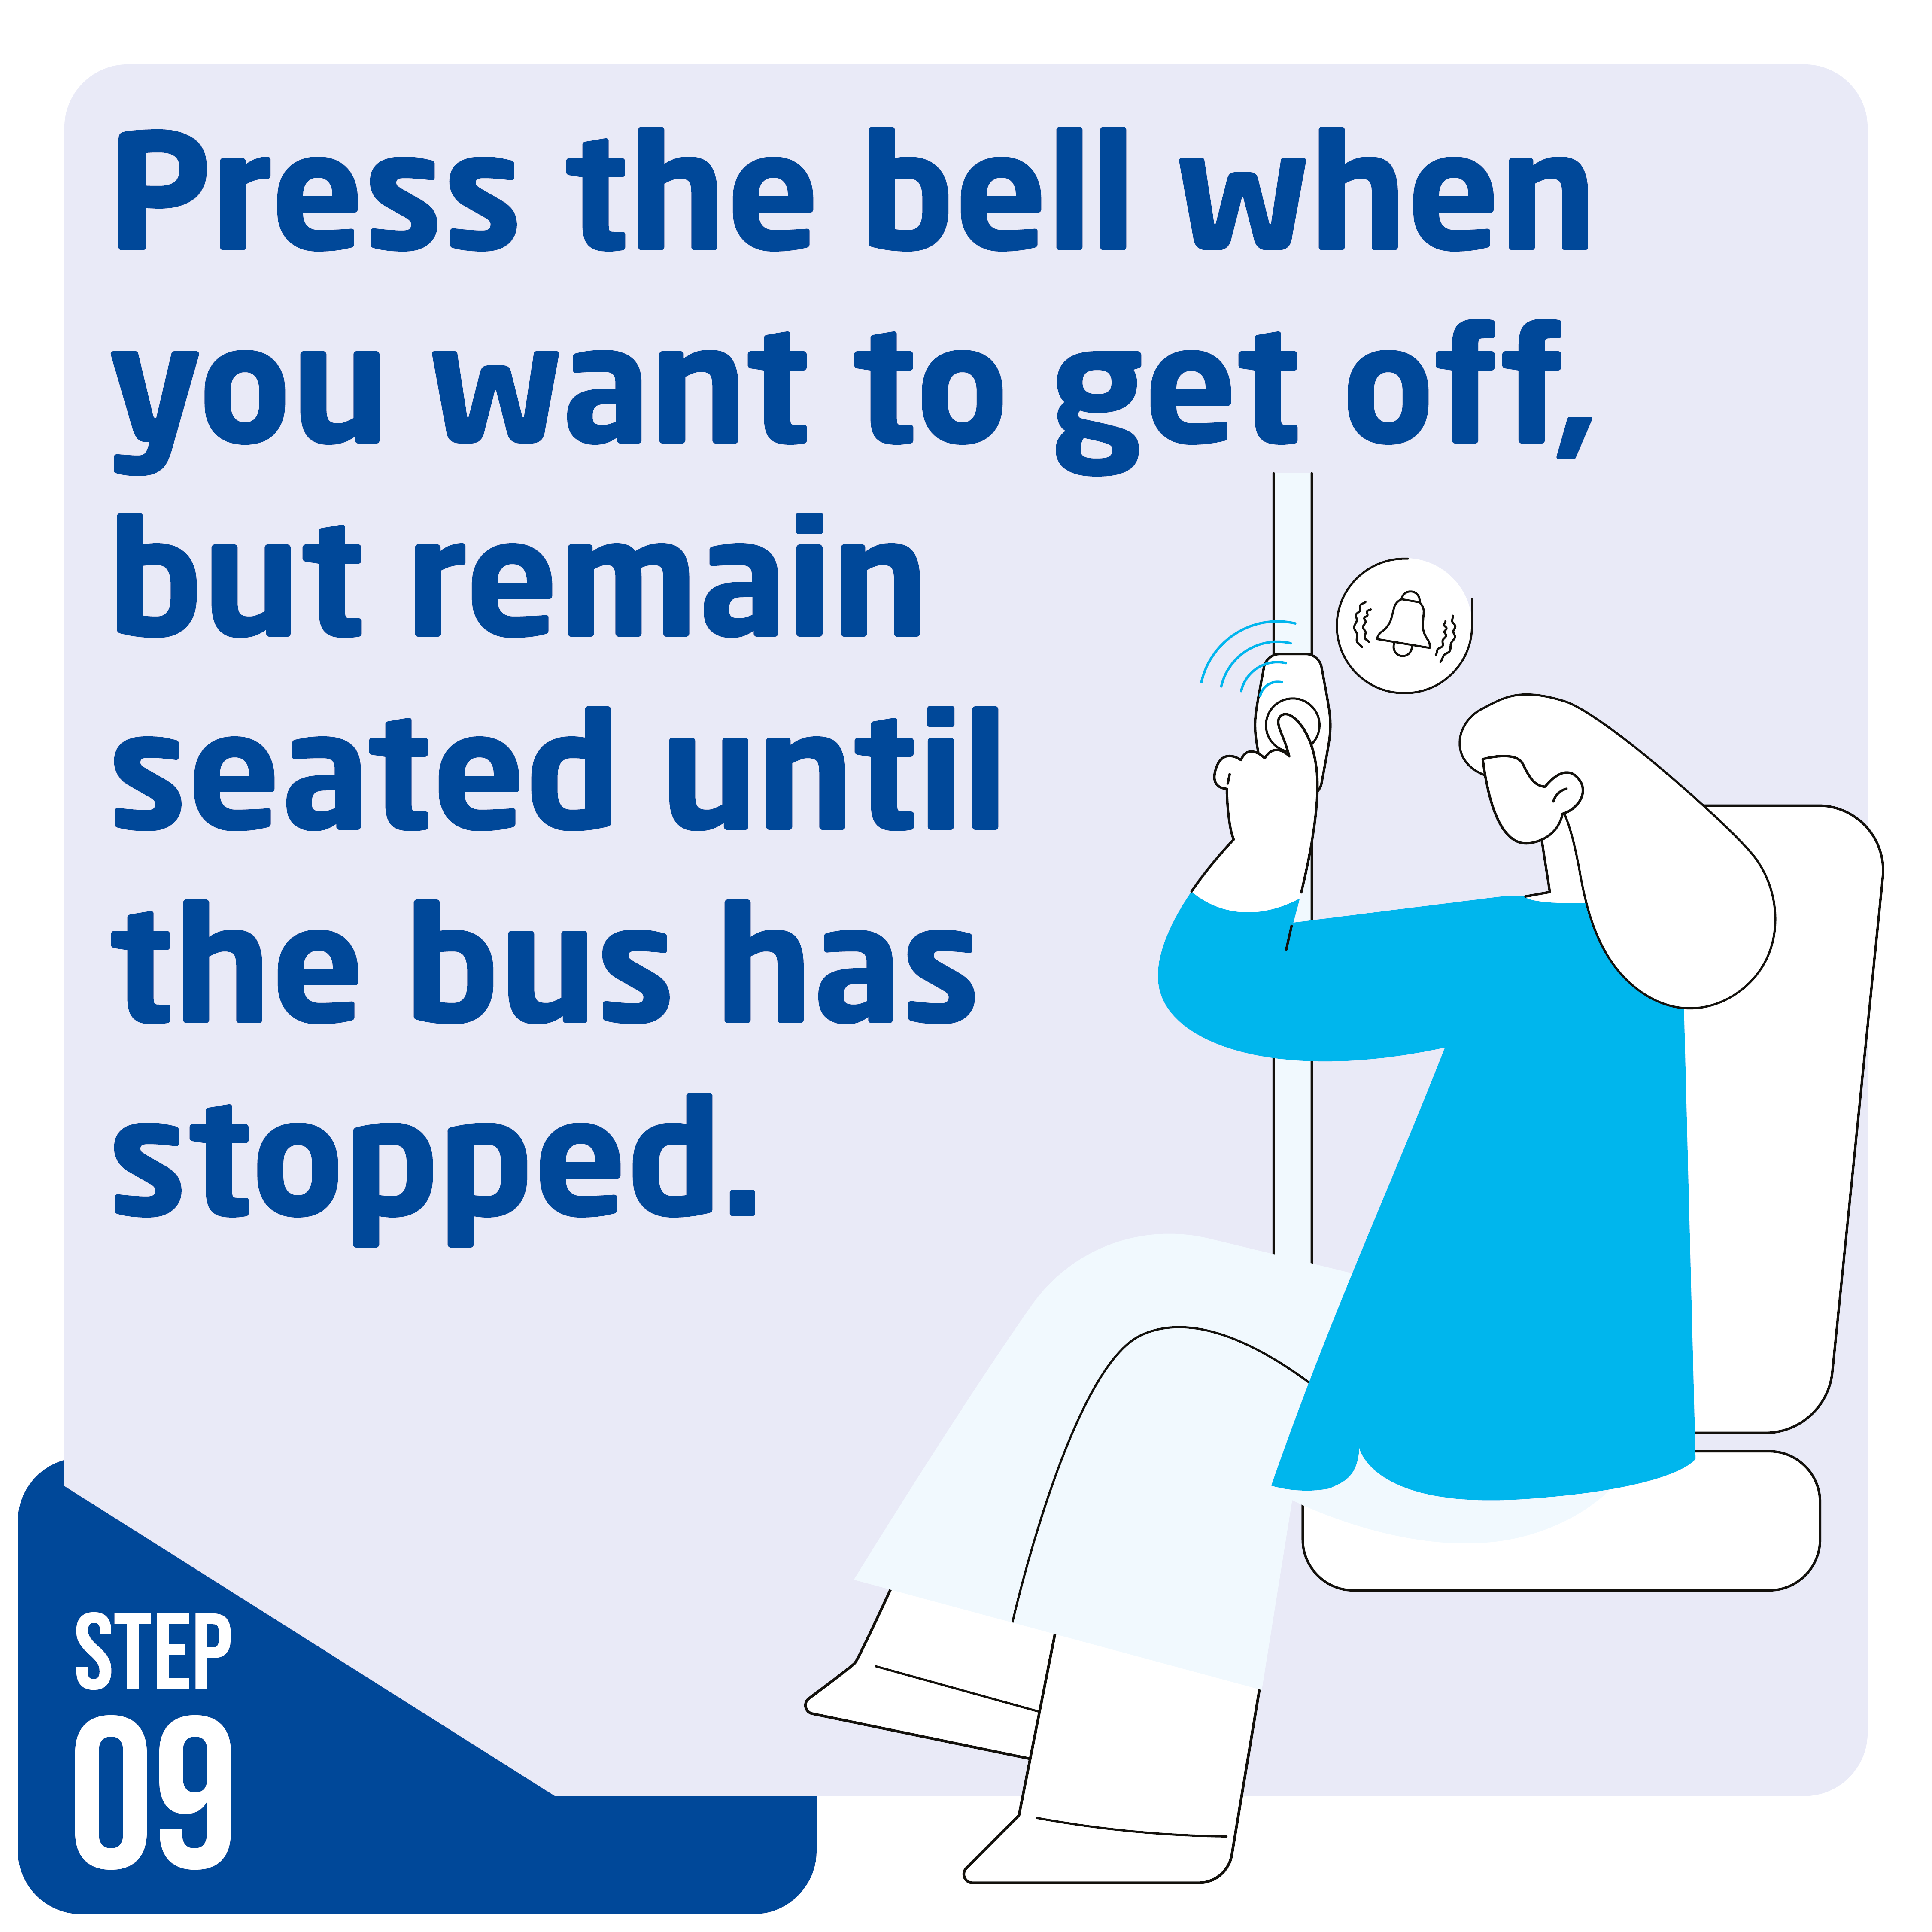 image of someone pressing the stop button on a bus